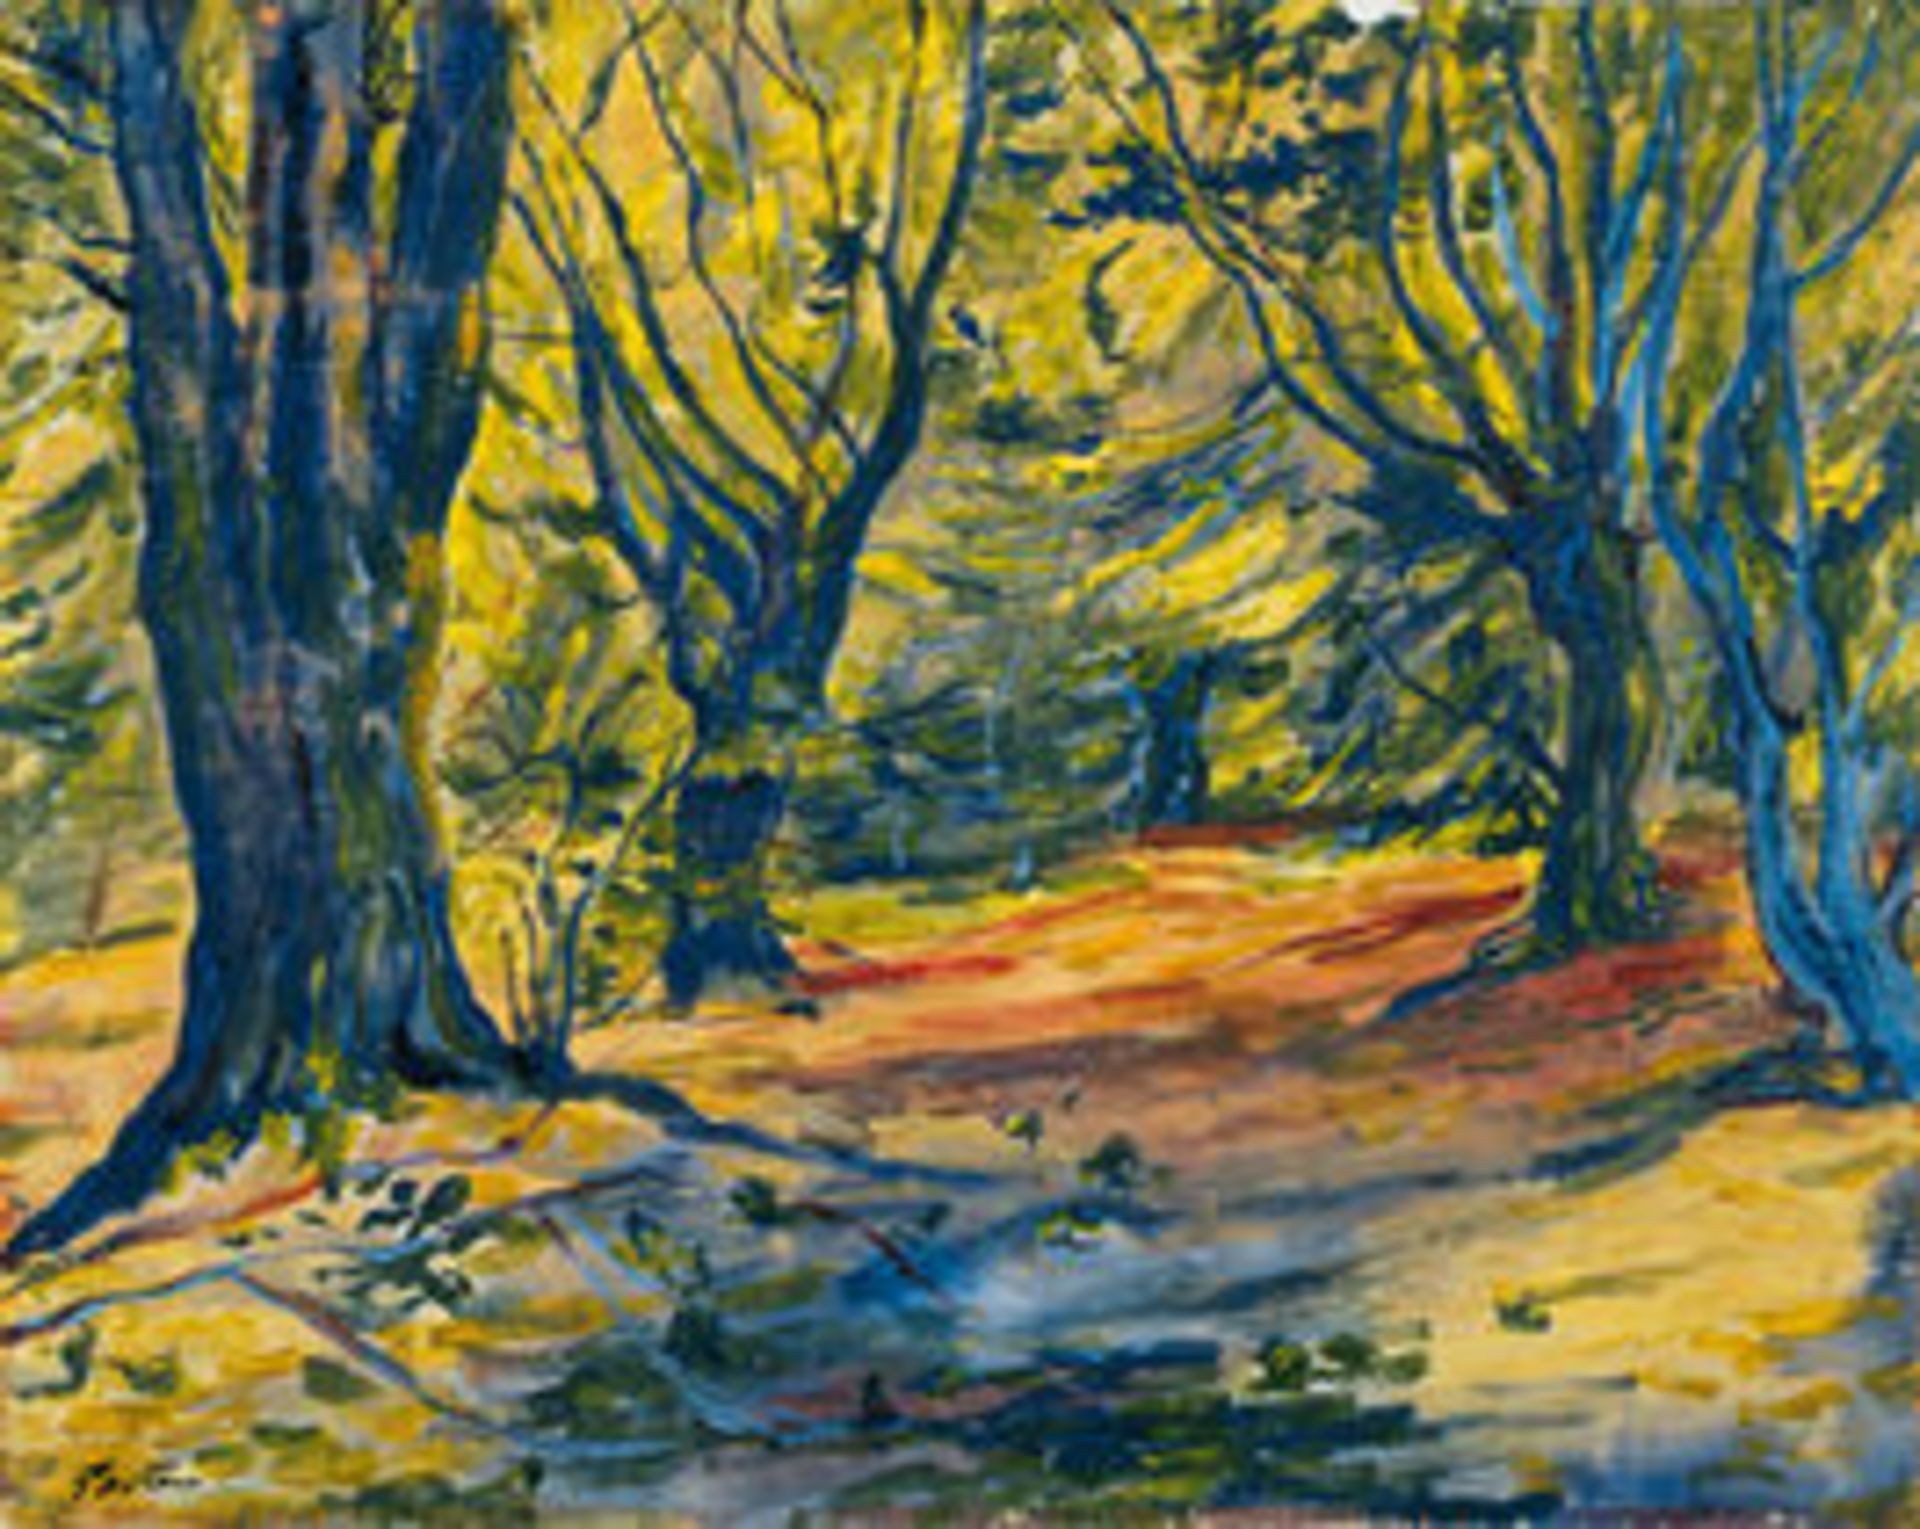 Jacob Epstein "Epping Forest" Print